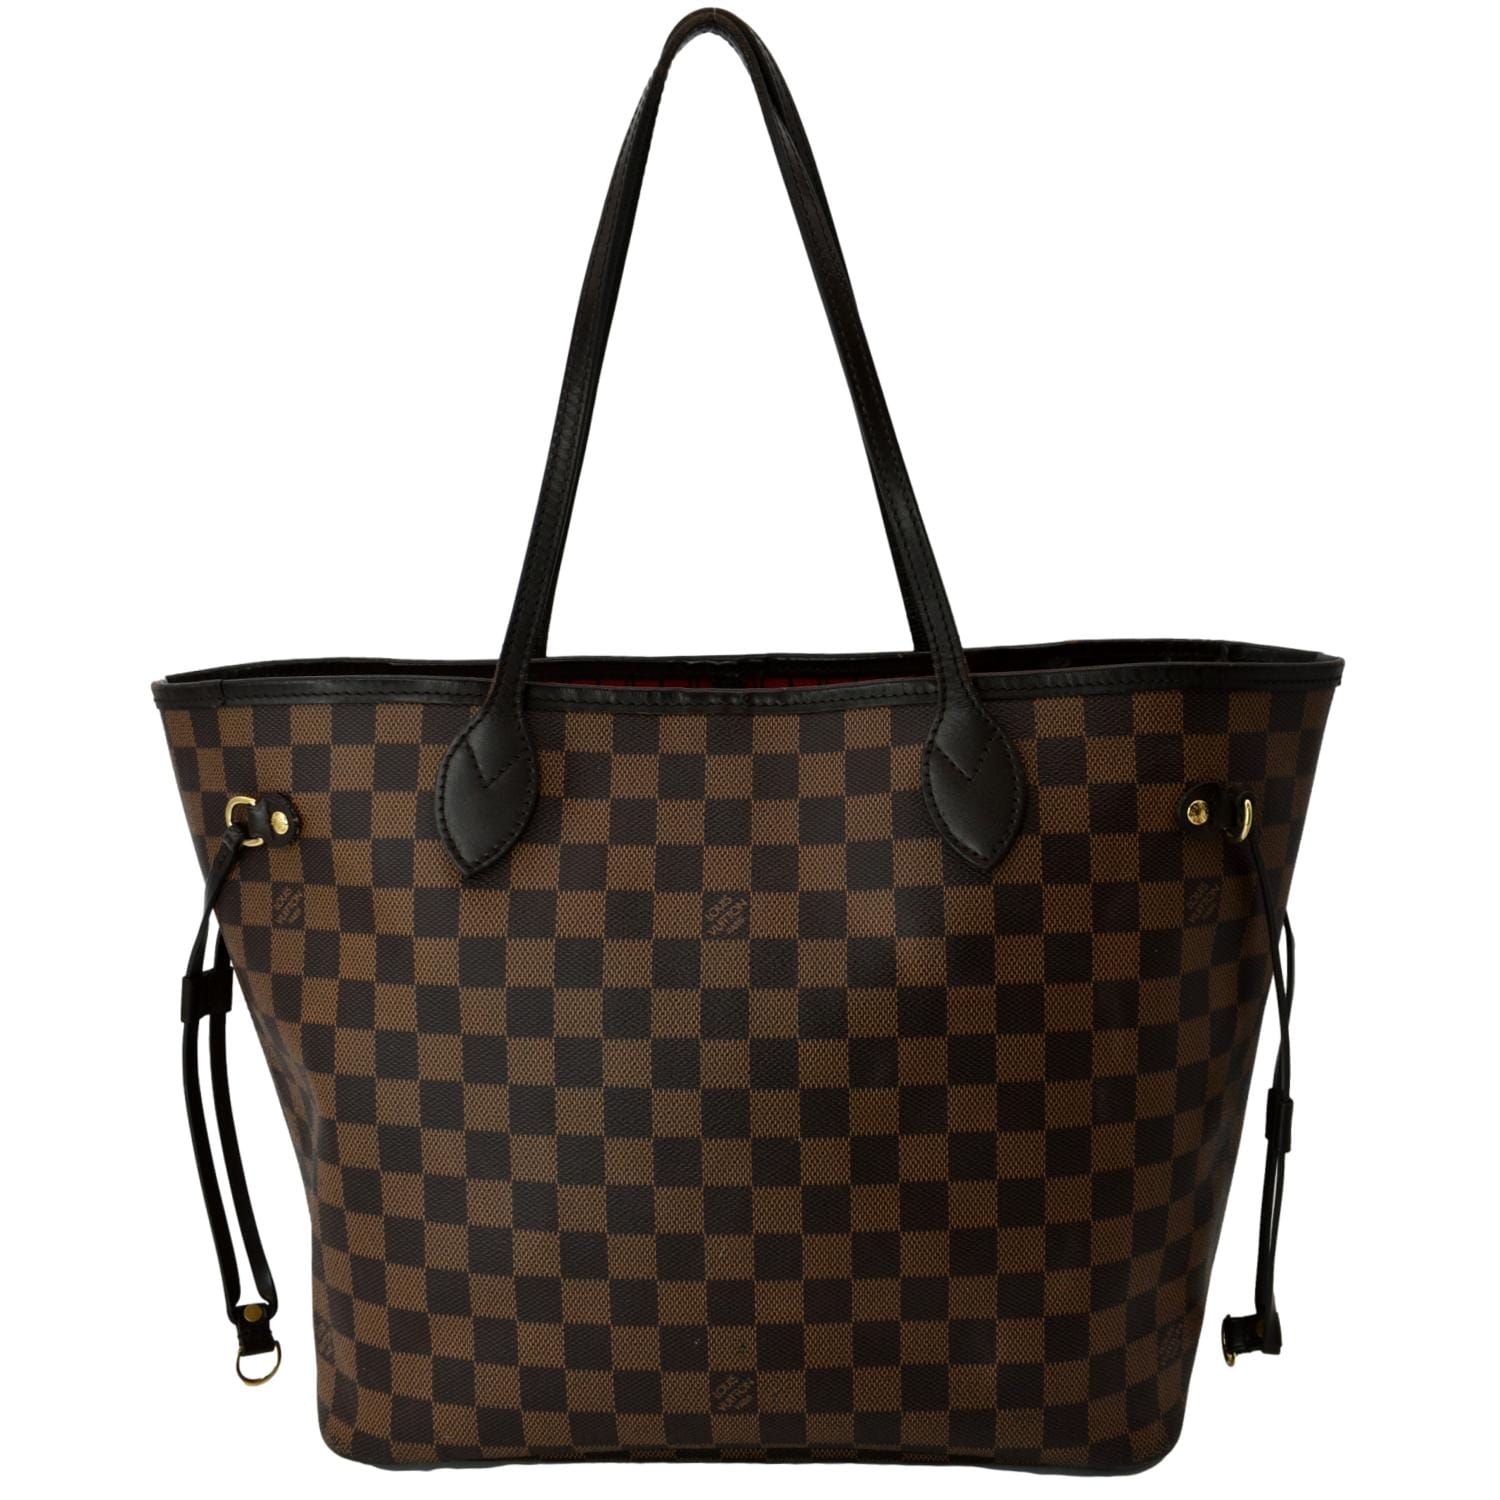 LOUIS VUITTON Neverfull MM Damier Ebene Tote Bag Brown- 15% OFF